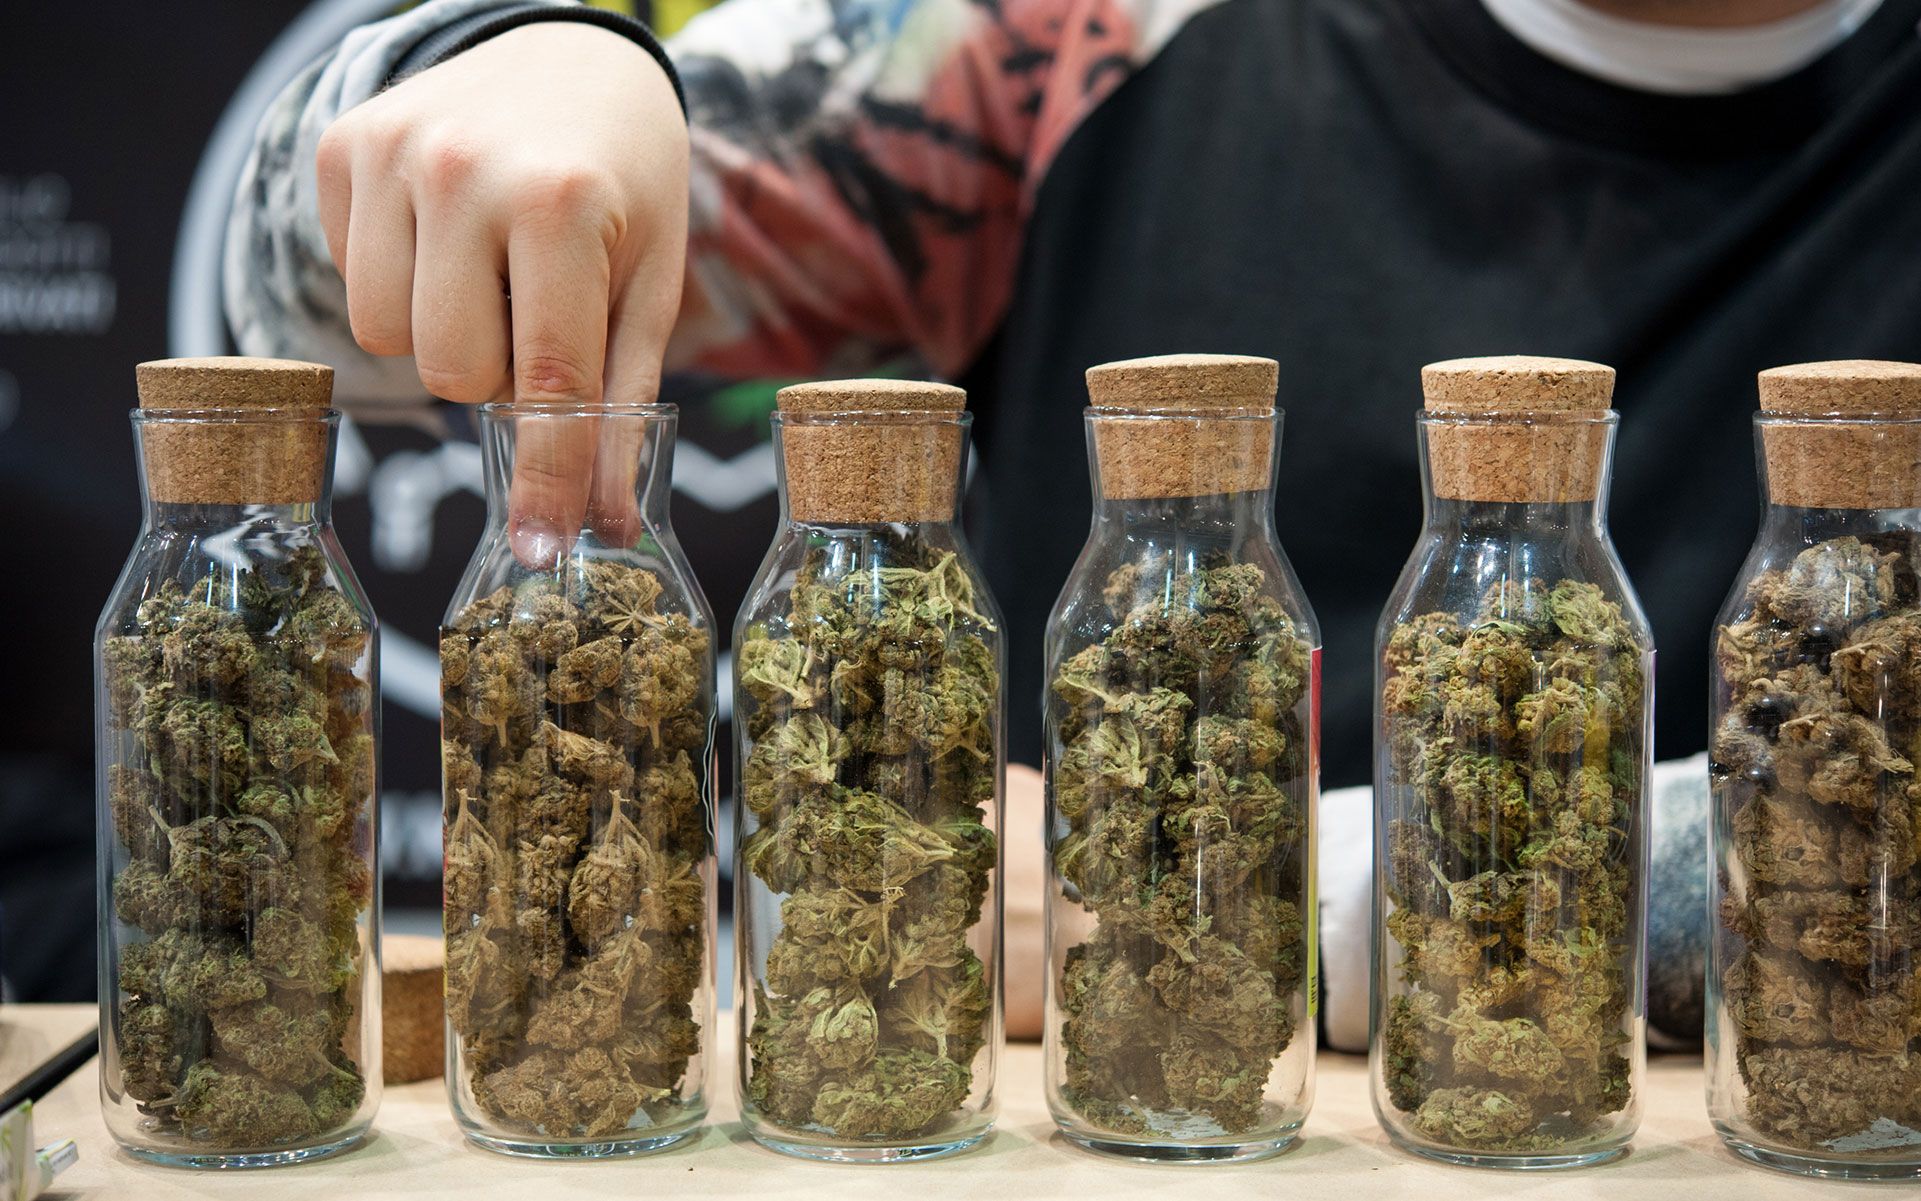 Choose a Marijuana Dispensary with These 5 Tips from the Pros - Neo Media  Lab